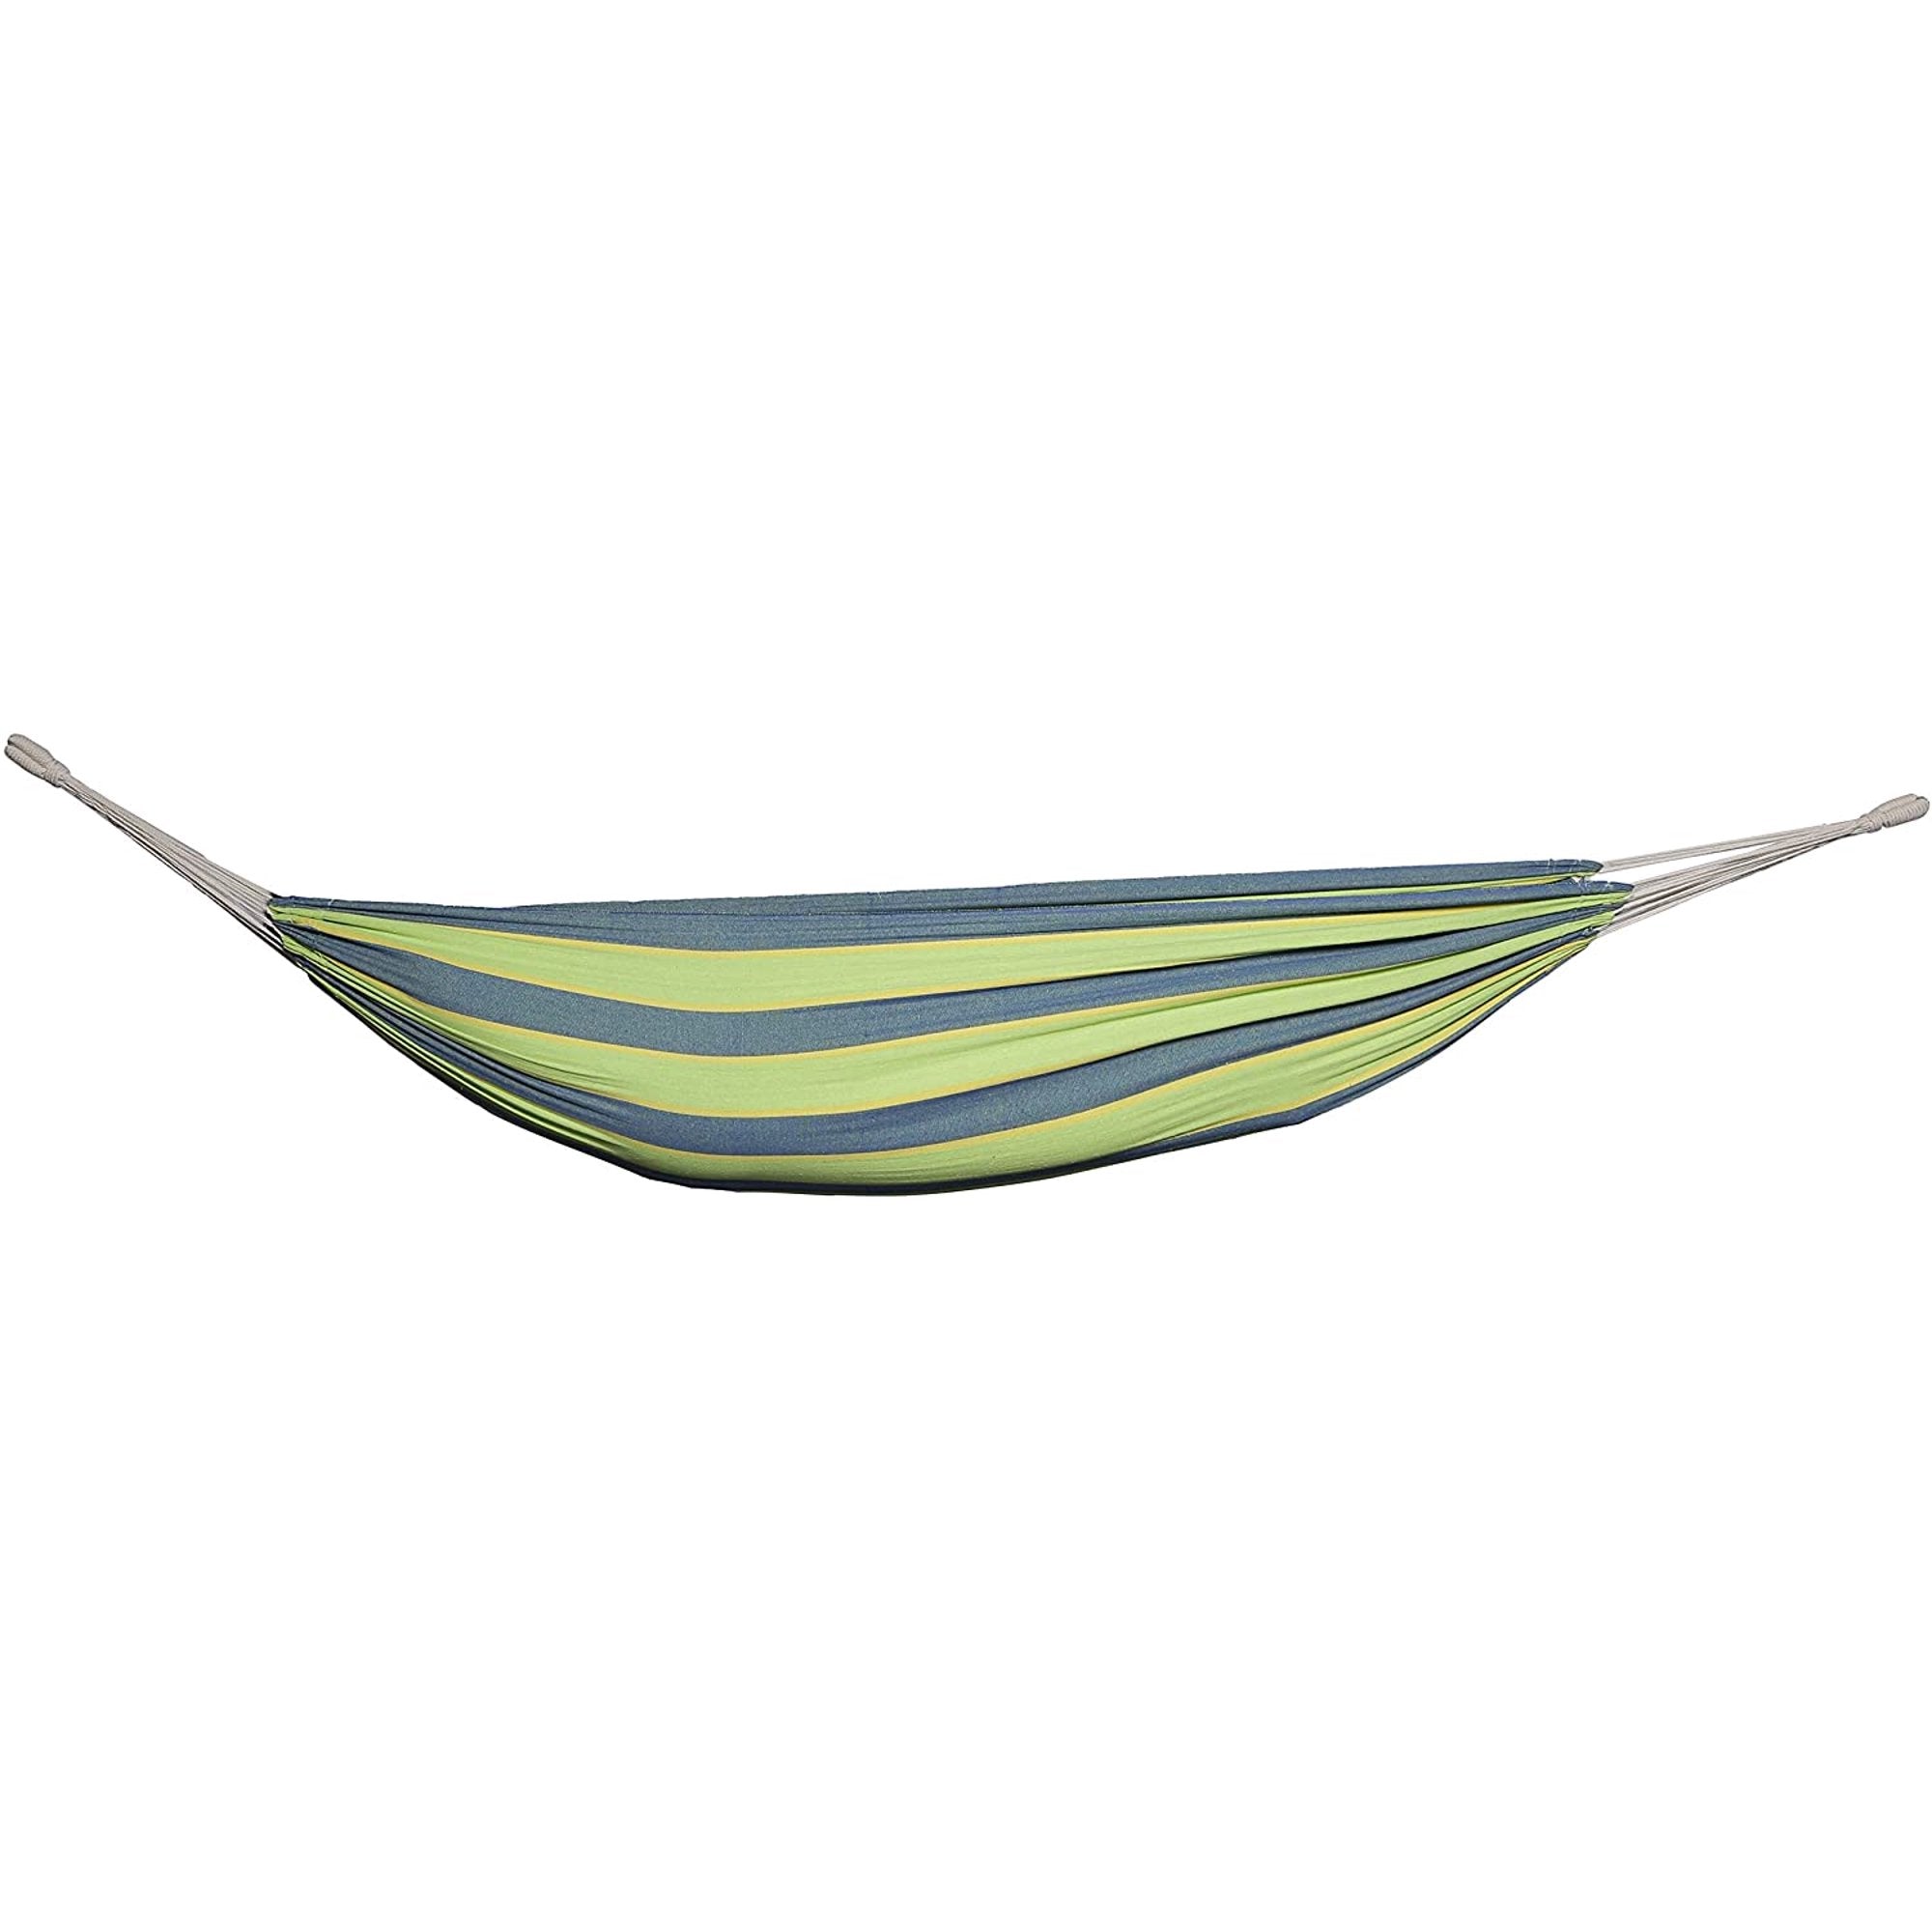 Gilbin Cotton Double Hammock Portable 2 Person Durable Extra Large Canvas Hammock, Canvas Double Brazilian Hammock, Perfect for Camping, Outdoors Gear, Backpack, Hiking, Hunting, Backyard